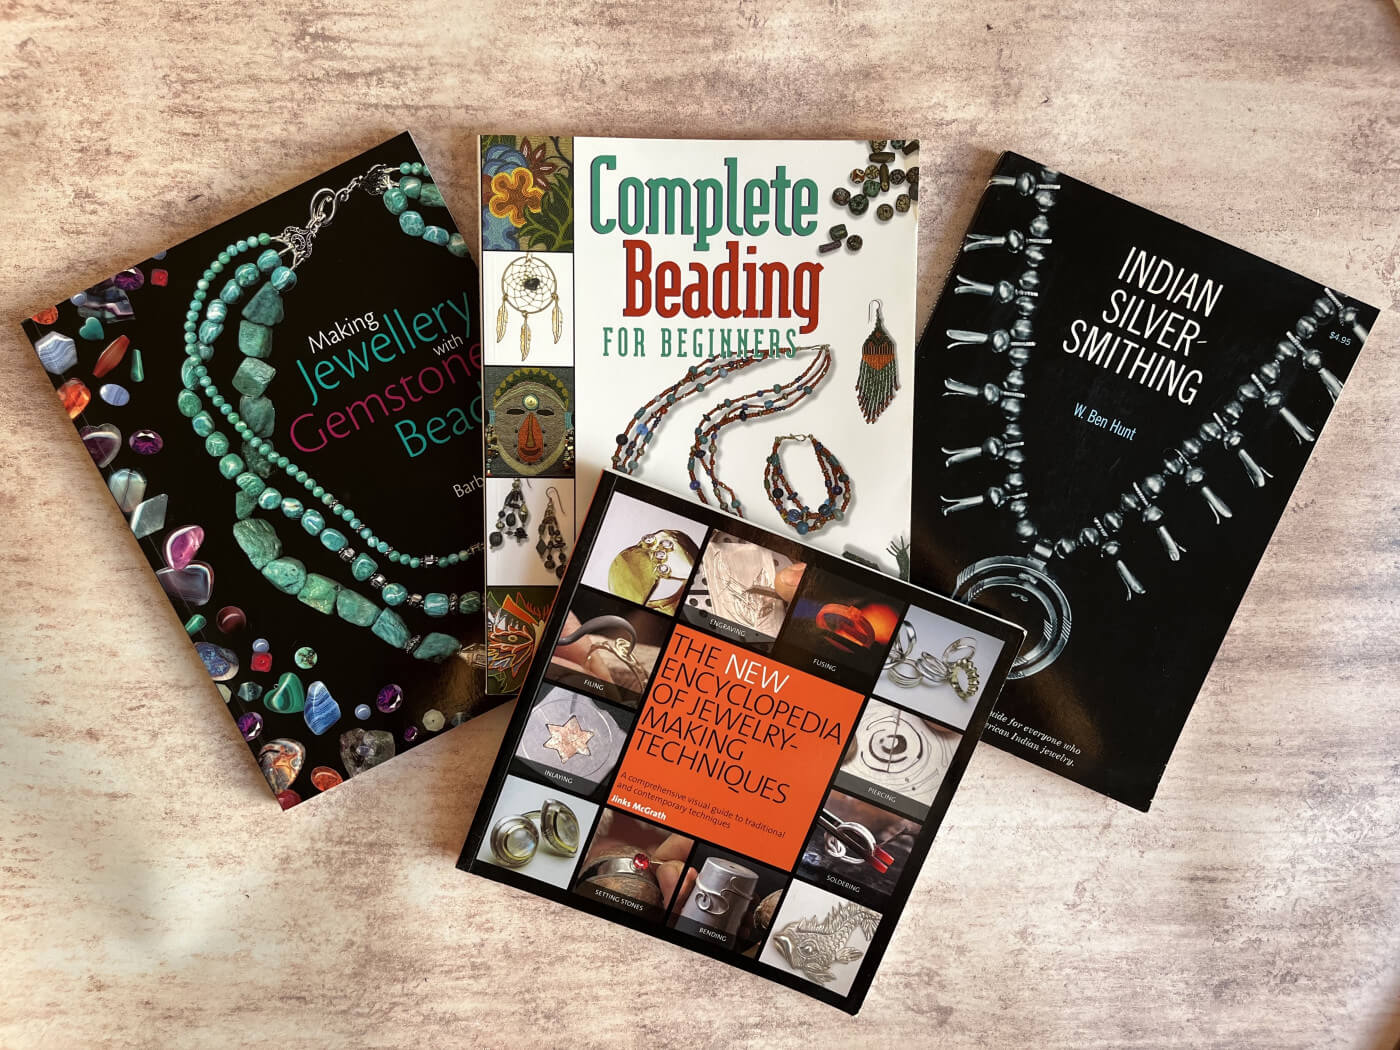 Learn How To Make Jewellery | A List Of Educational Books